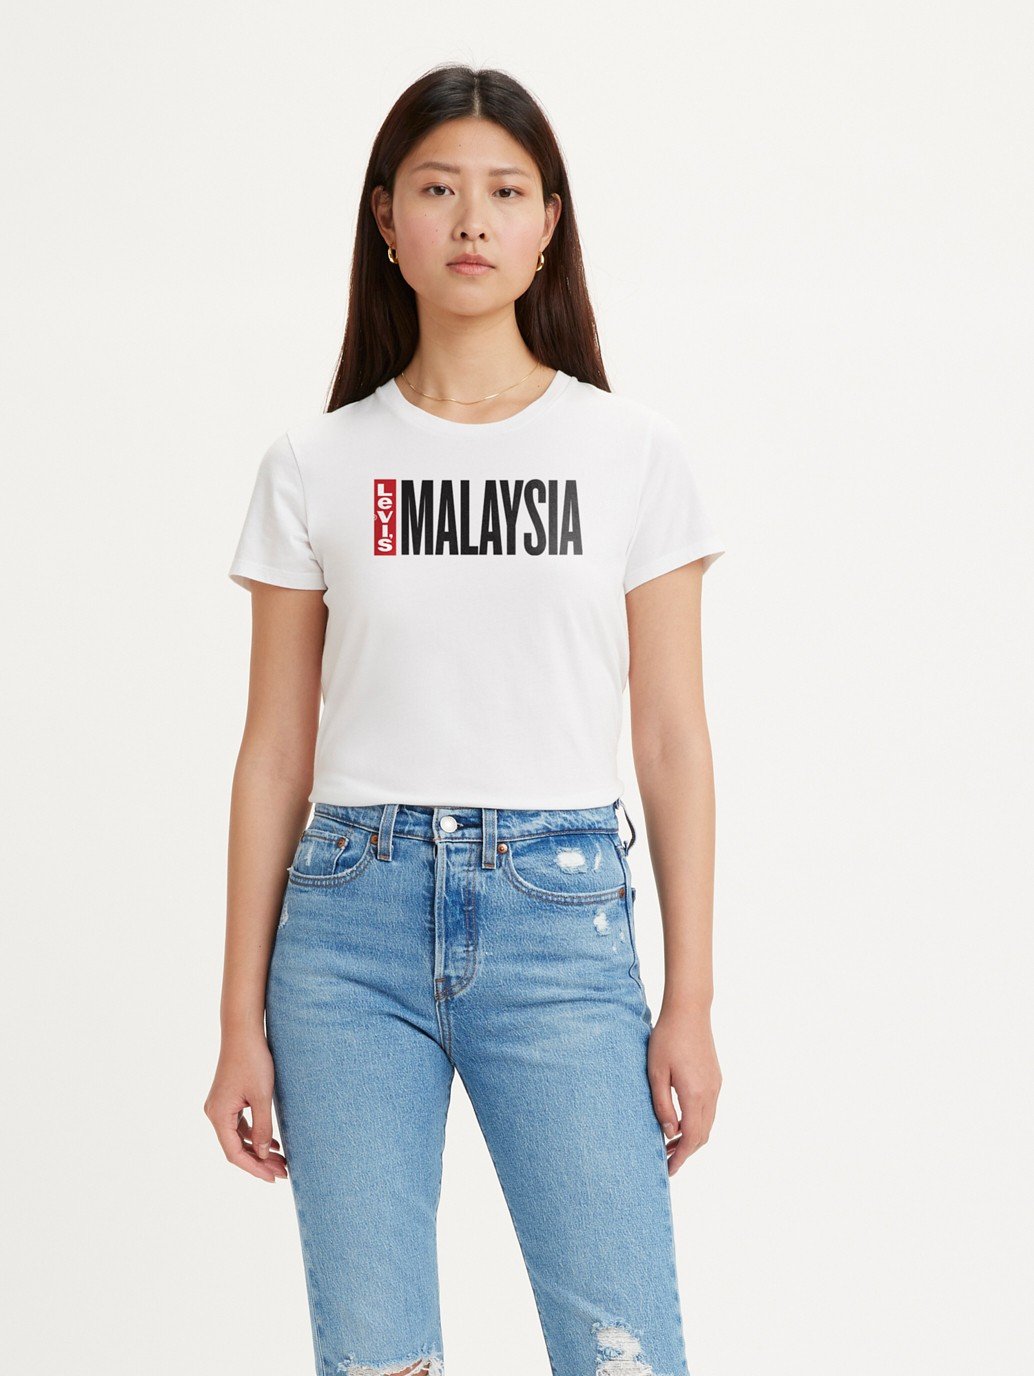 Buy Levi's® Malaysia Tee | Levi's® Official Online Store MY